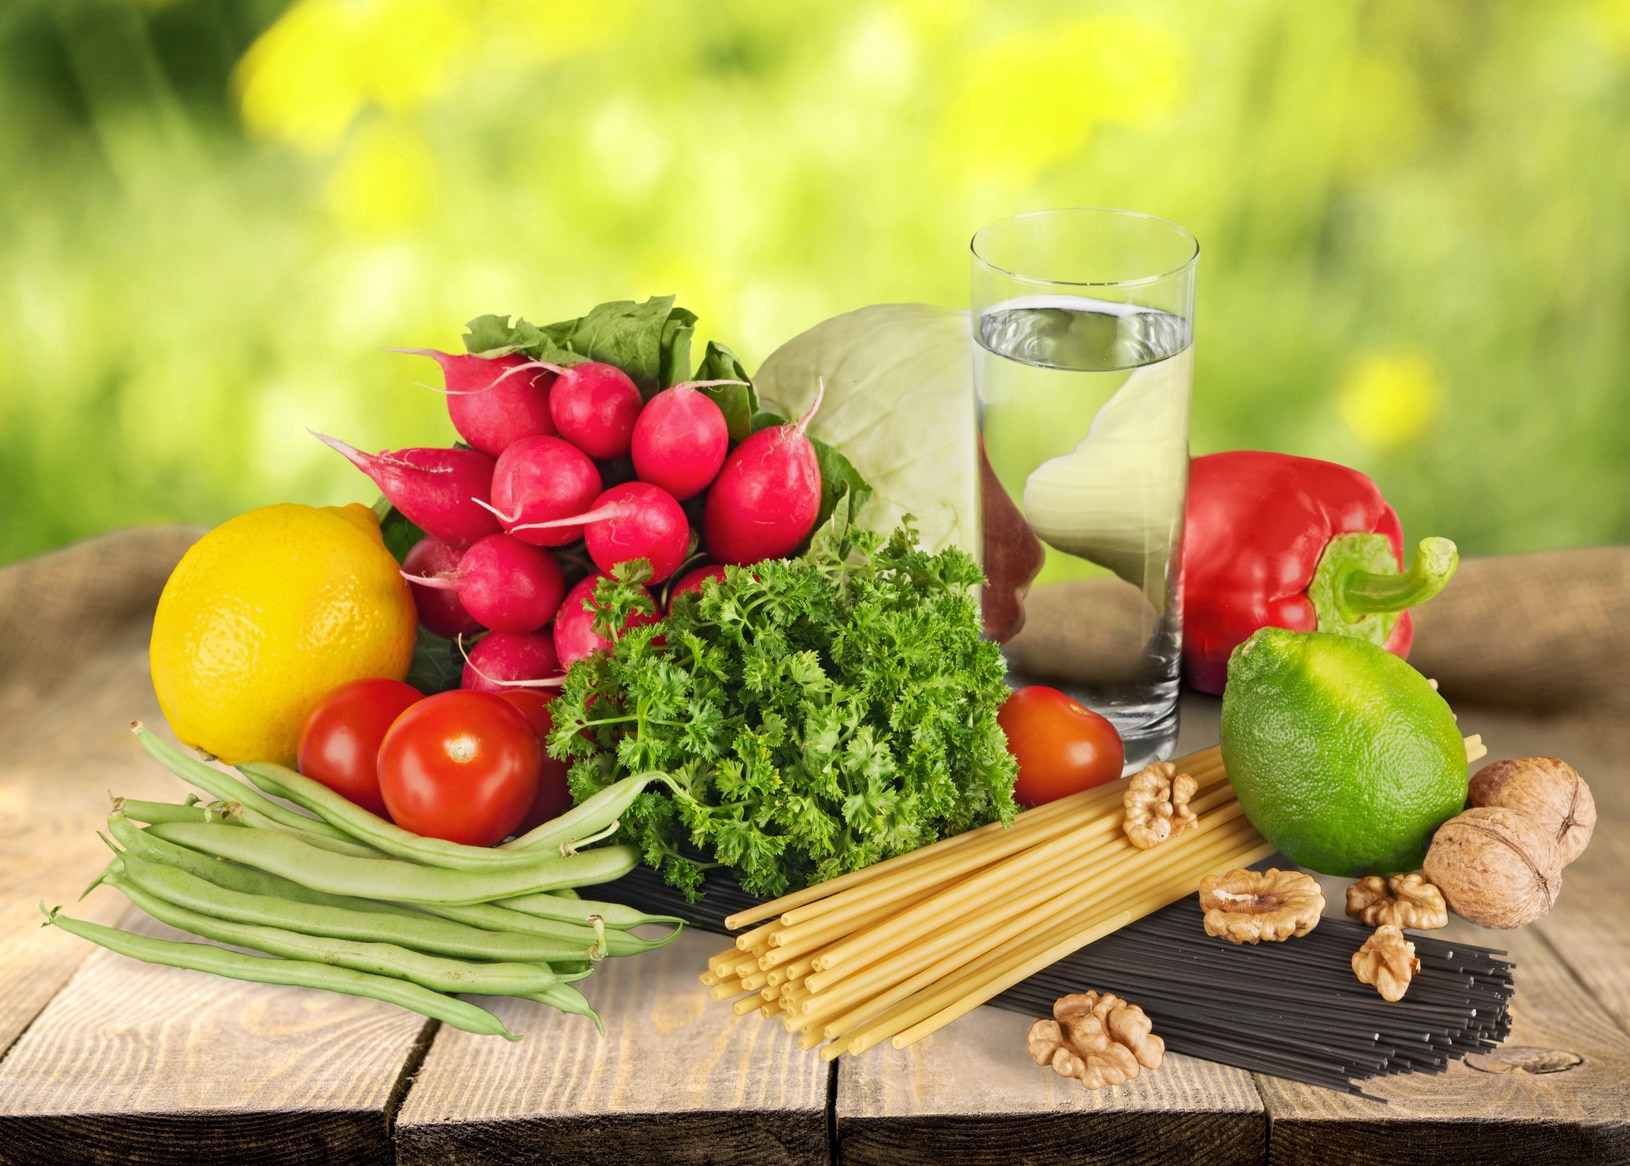 Healthy foods and a glass of water.